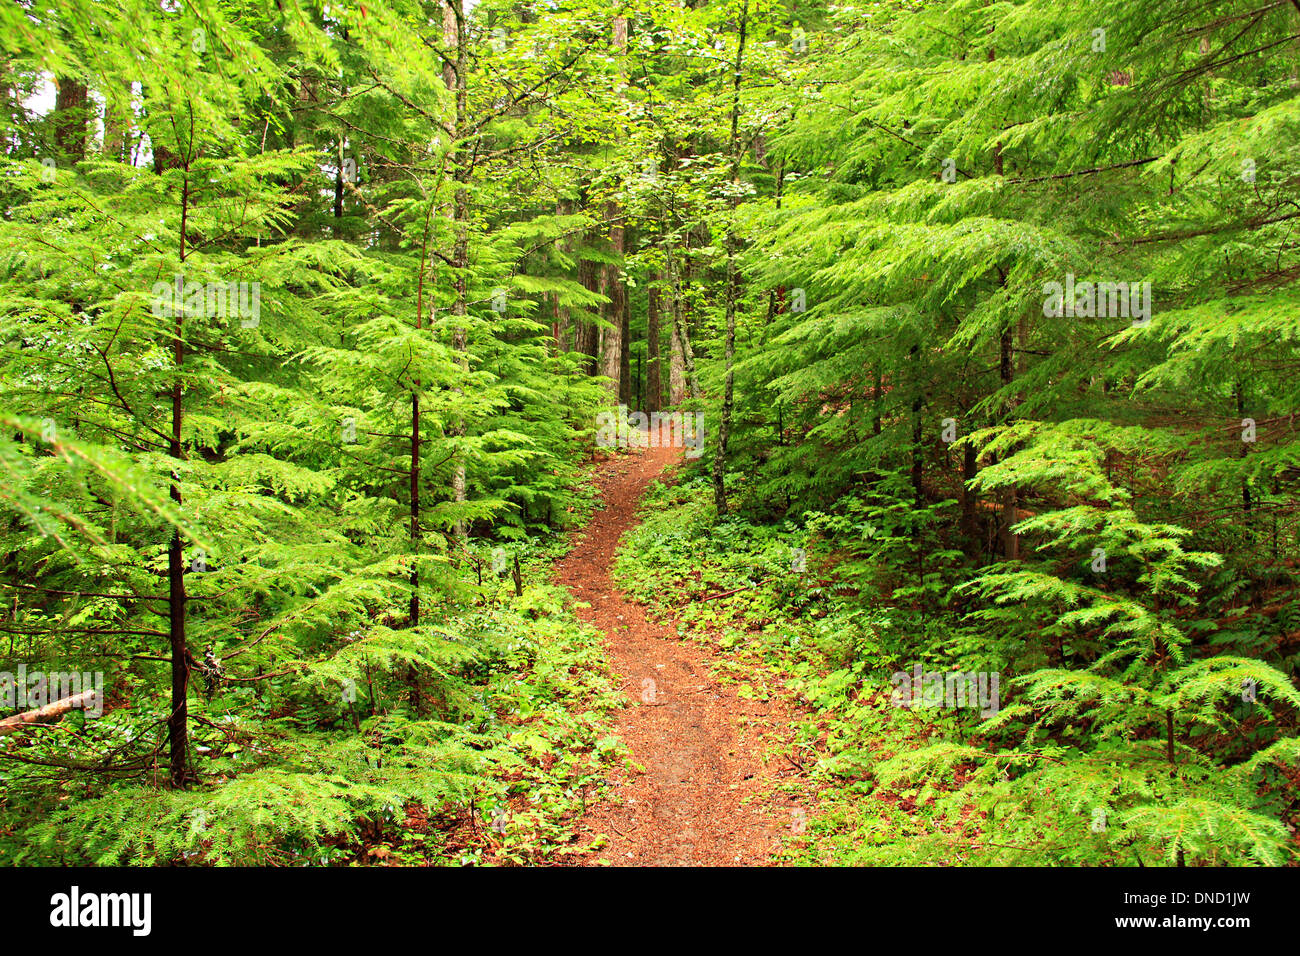 A trail through new growth forest of Douglas fir and western hemlock trees in the Table Rock Wilderness September 3, 2013 near Medford, Oregon. Stock Photo